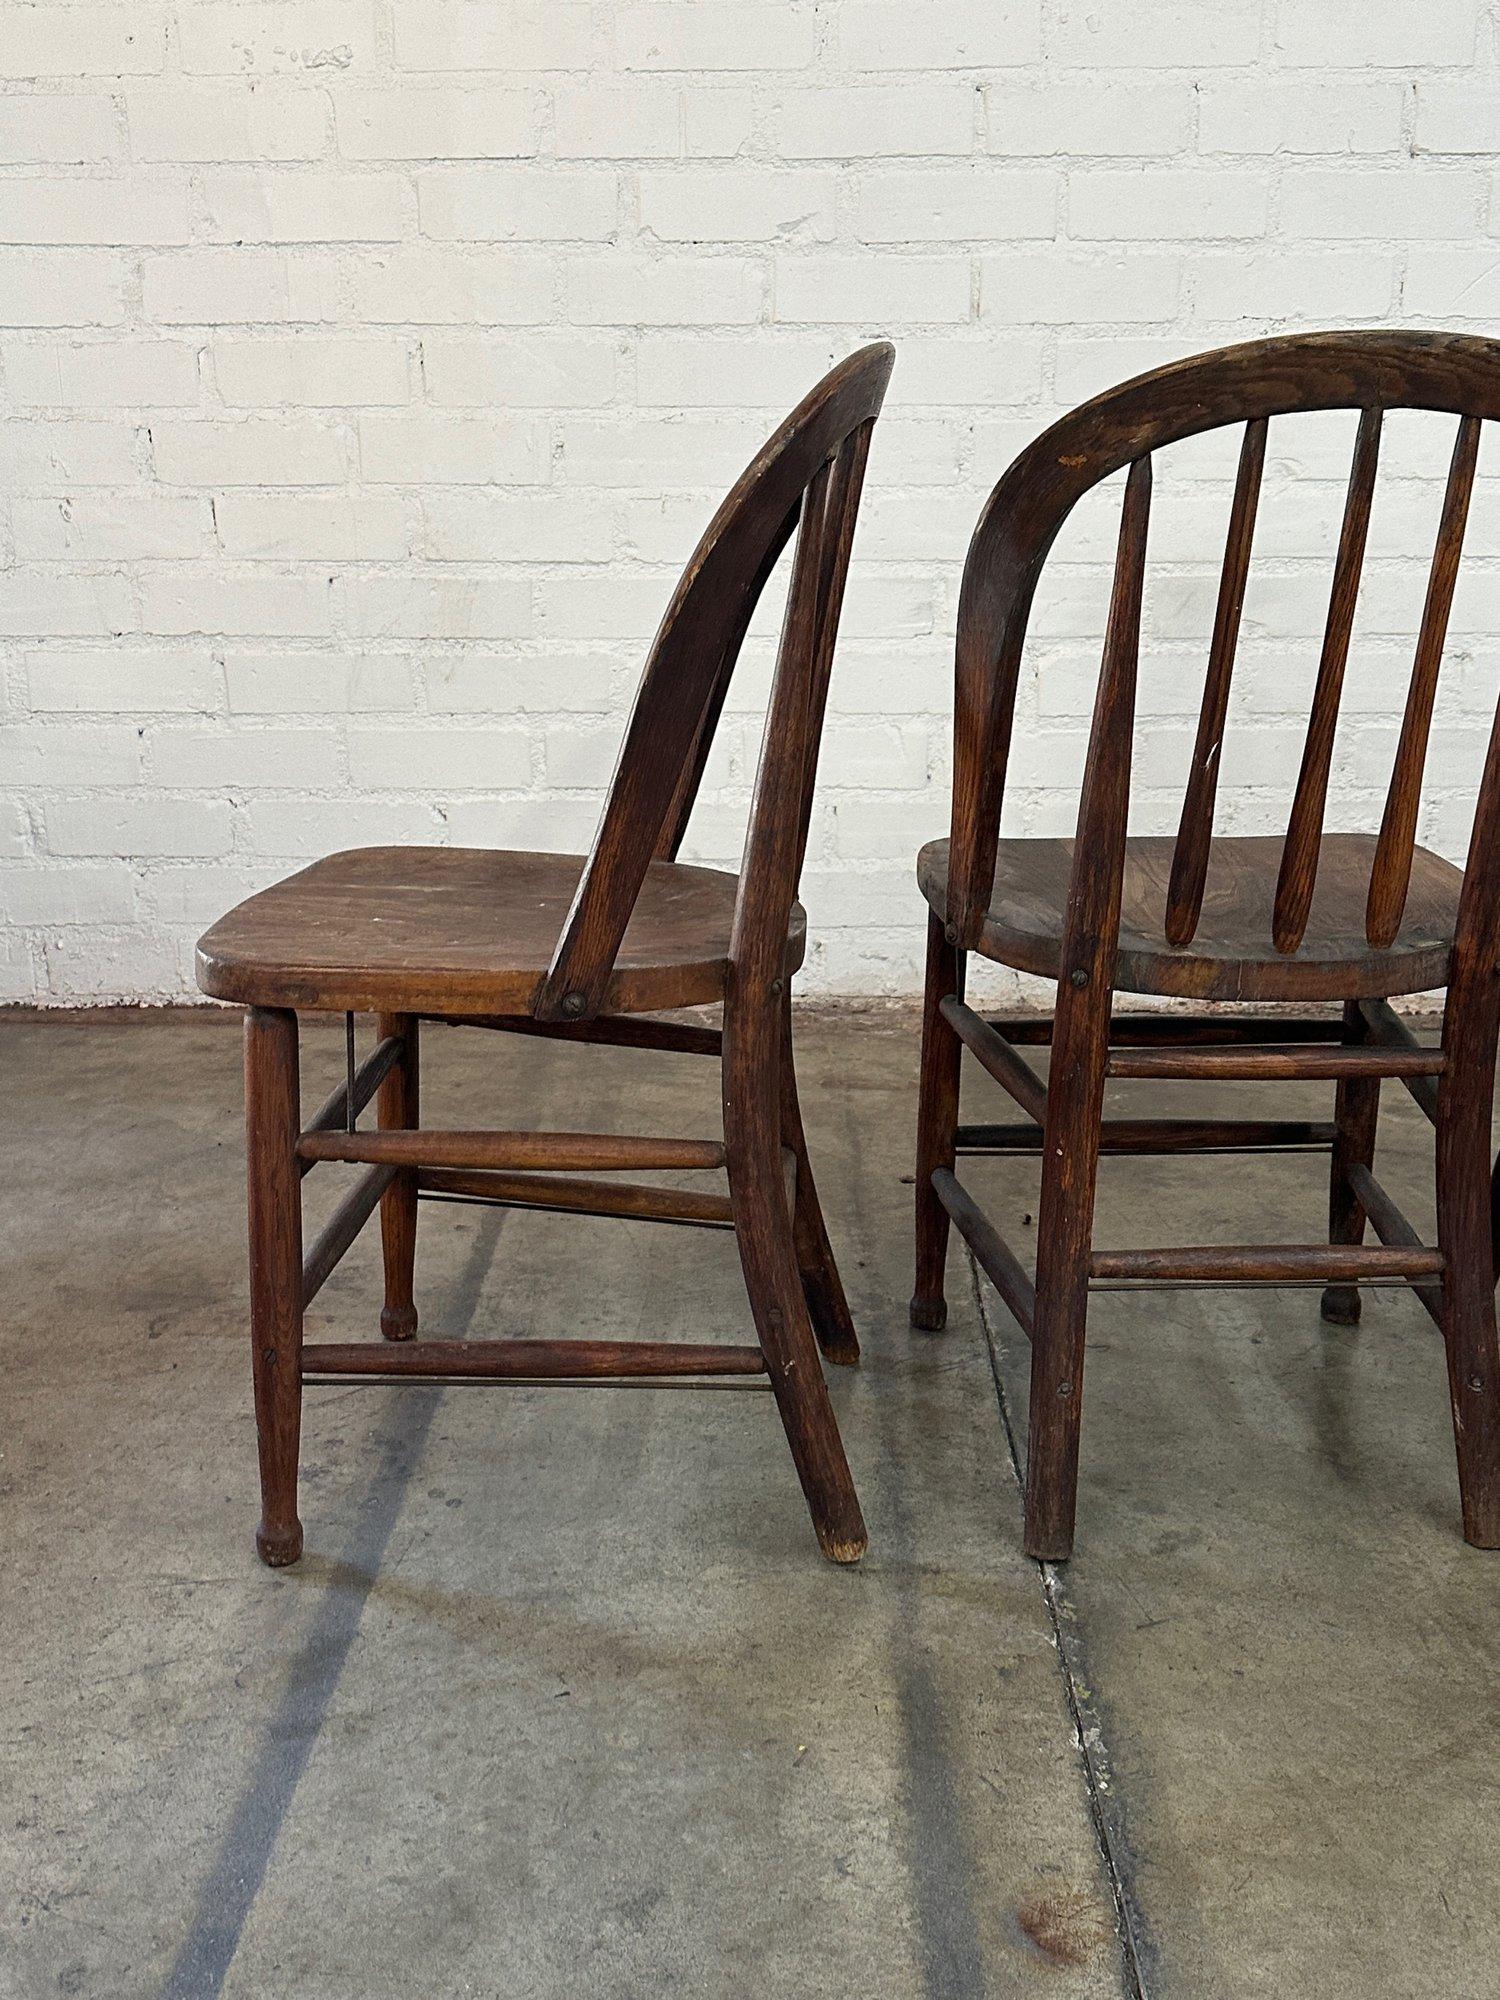 Vintage Farmhouse Spindle Chairs 8